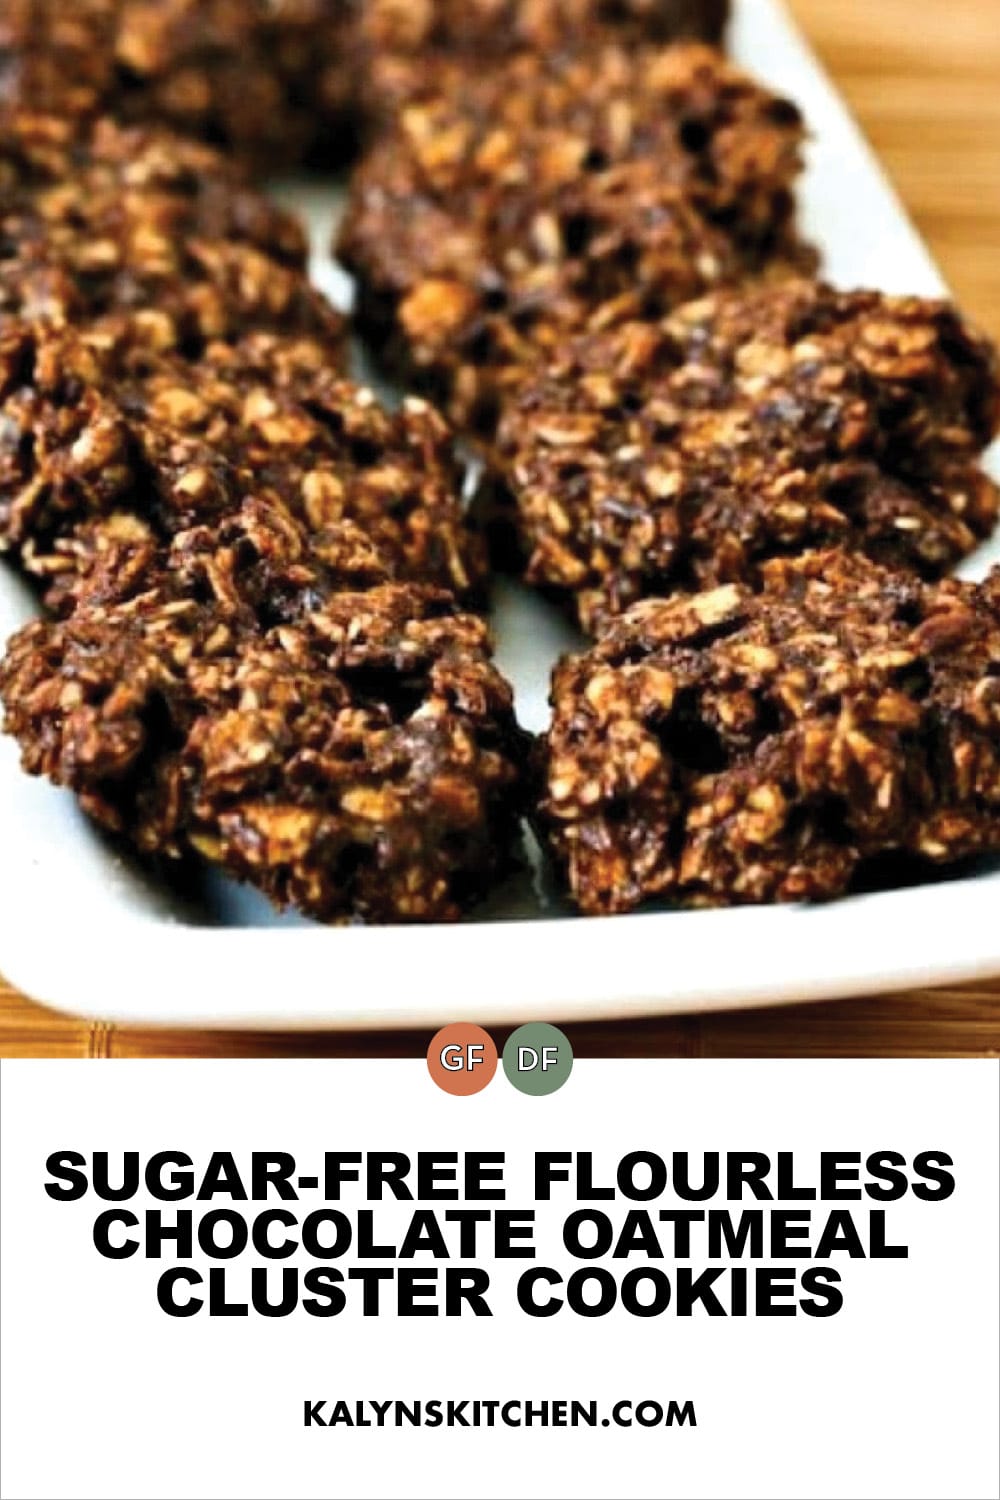 Pinterest image of Sugar-Free Flourless Chocolate Oatmeal Cluster Cookies